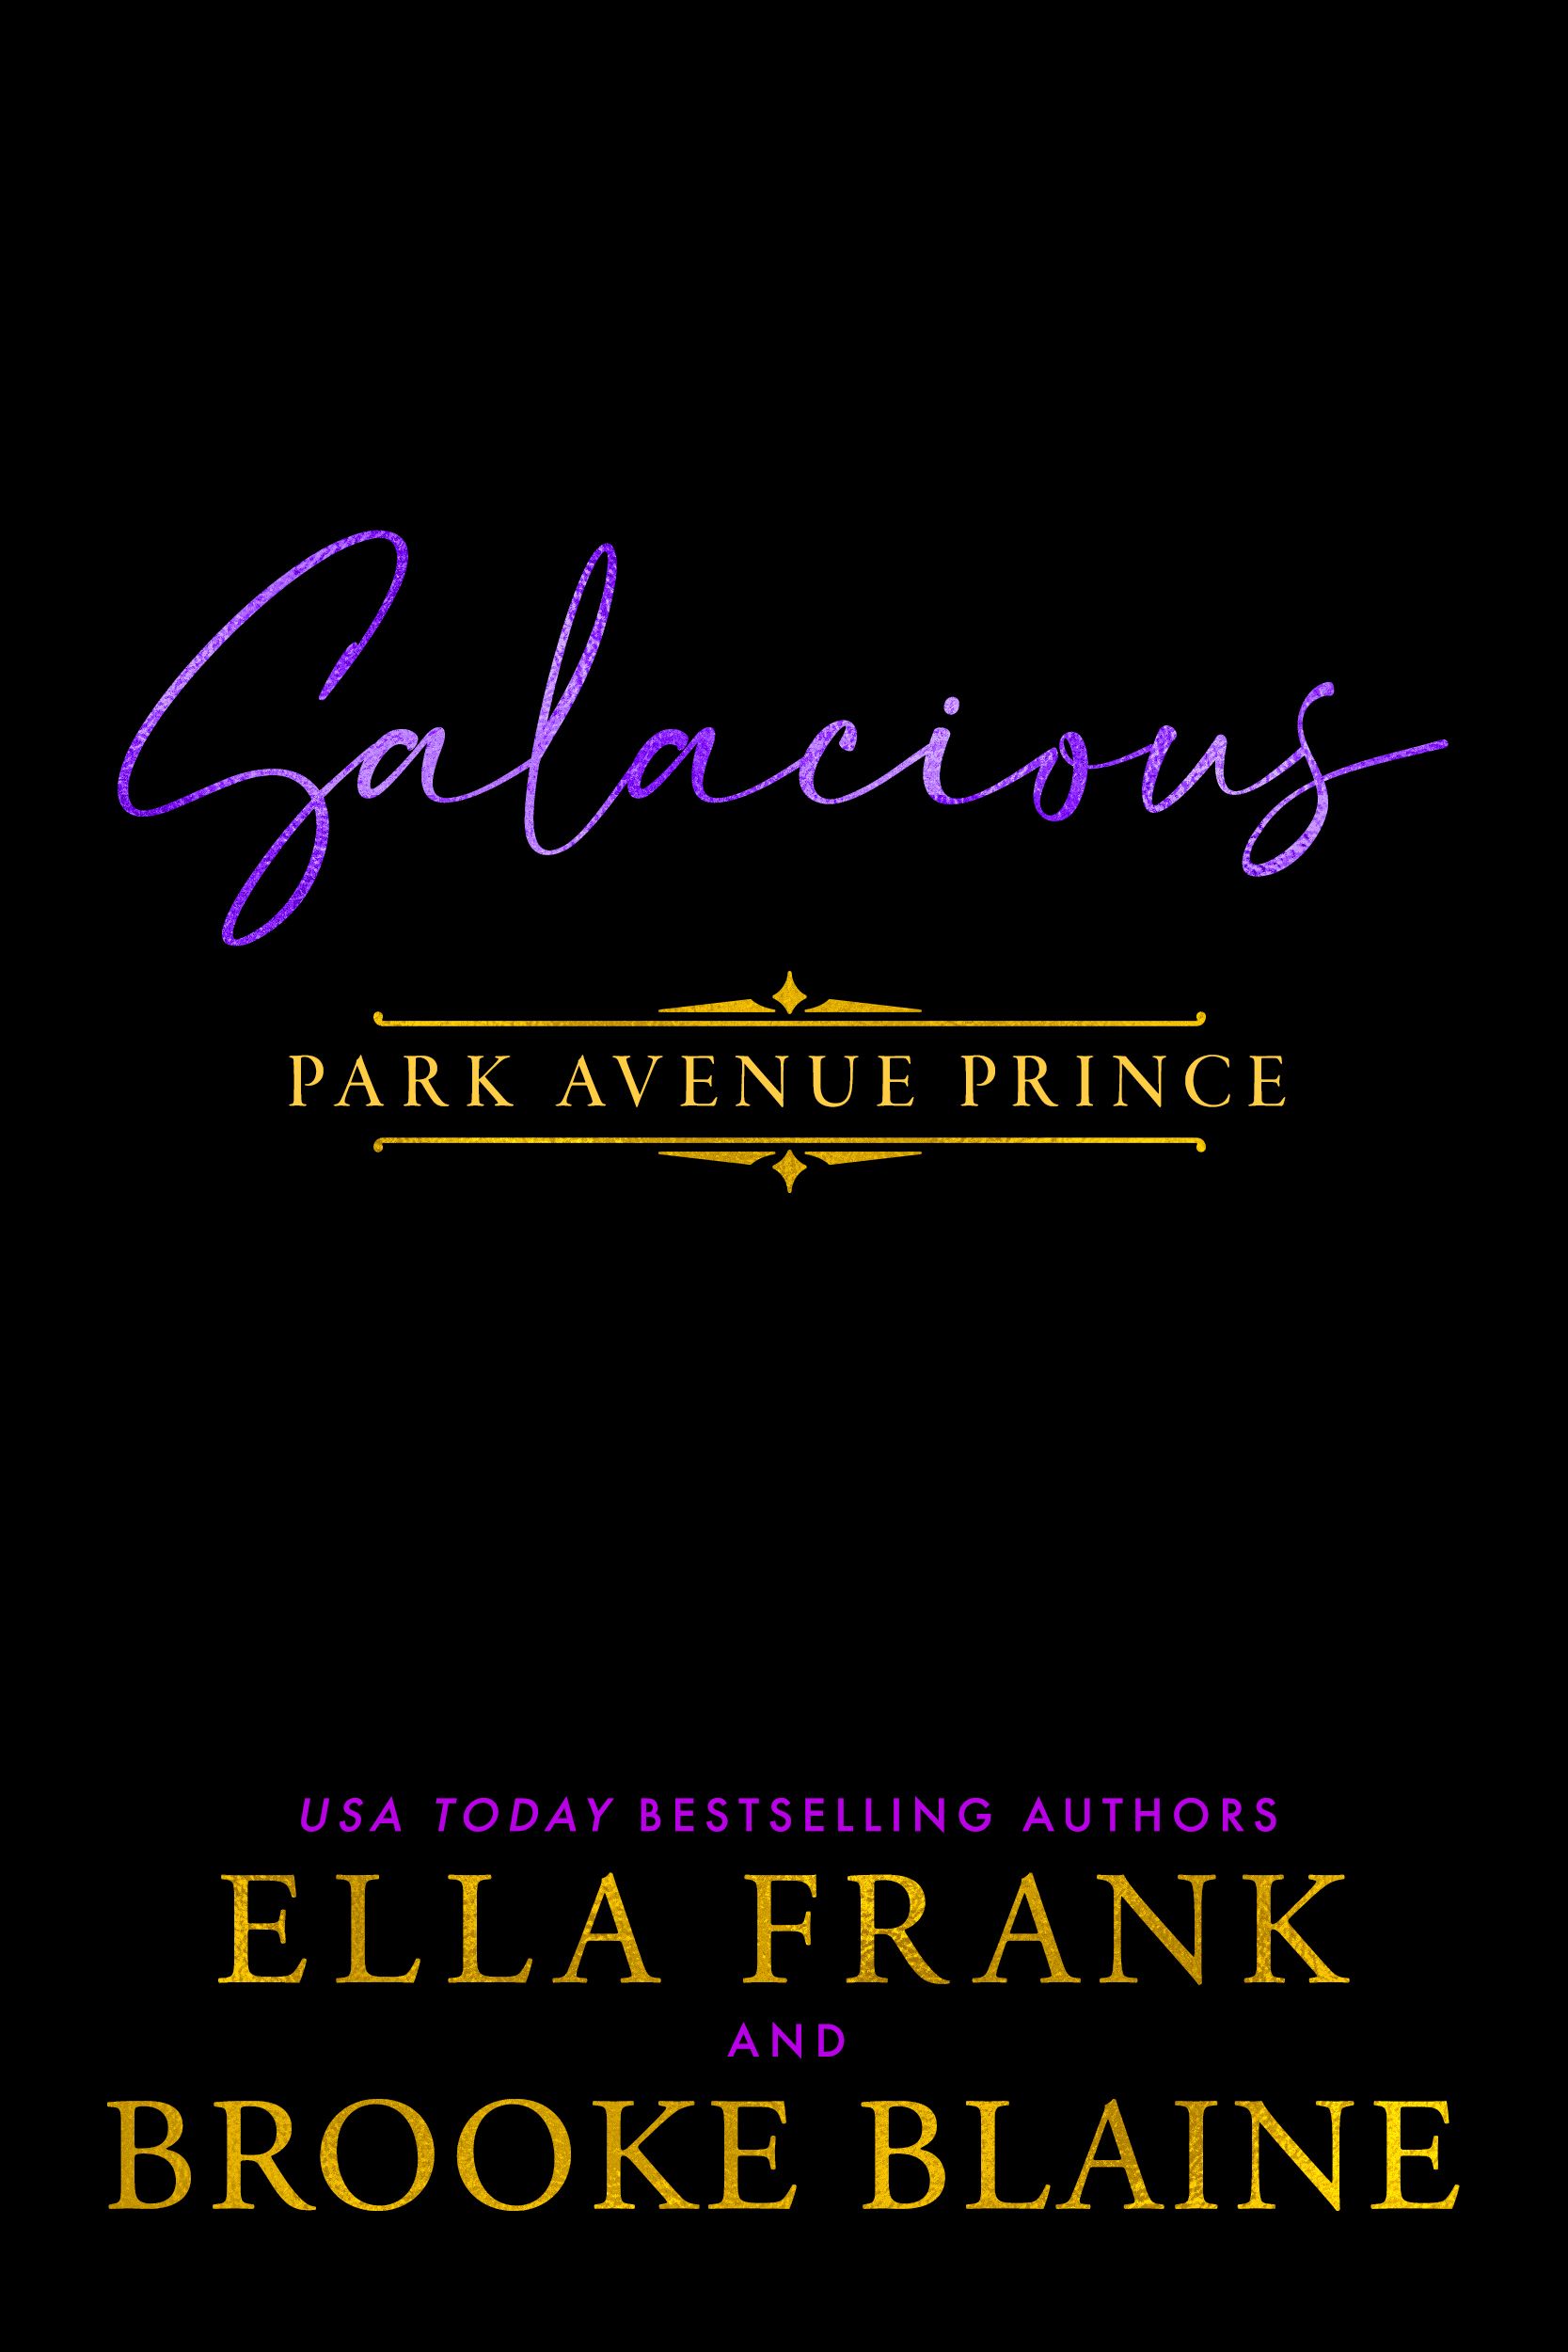 The cover of salacious park avenue prince by ella frank and brooke blaine